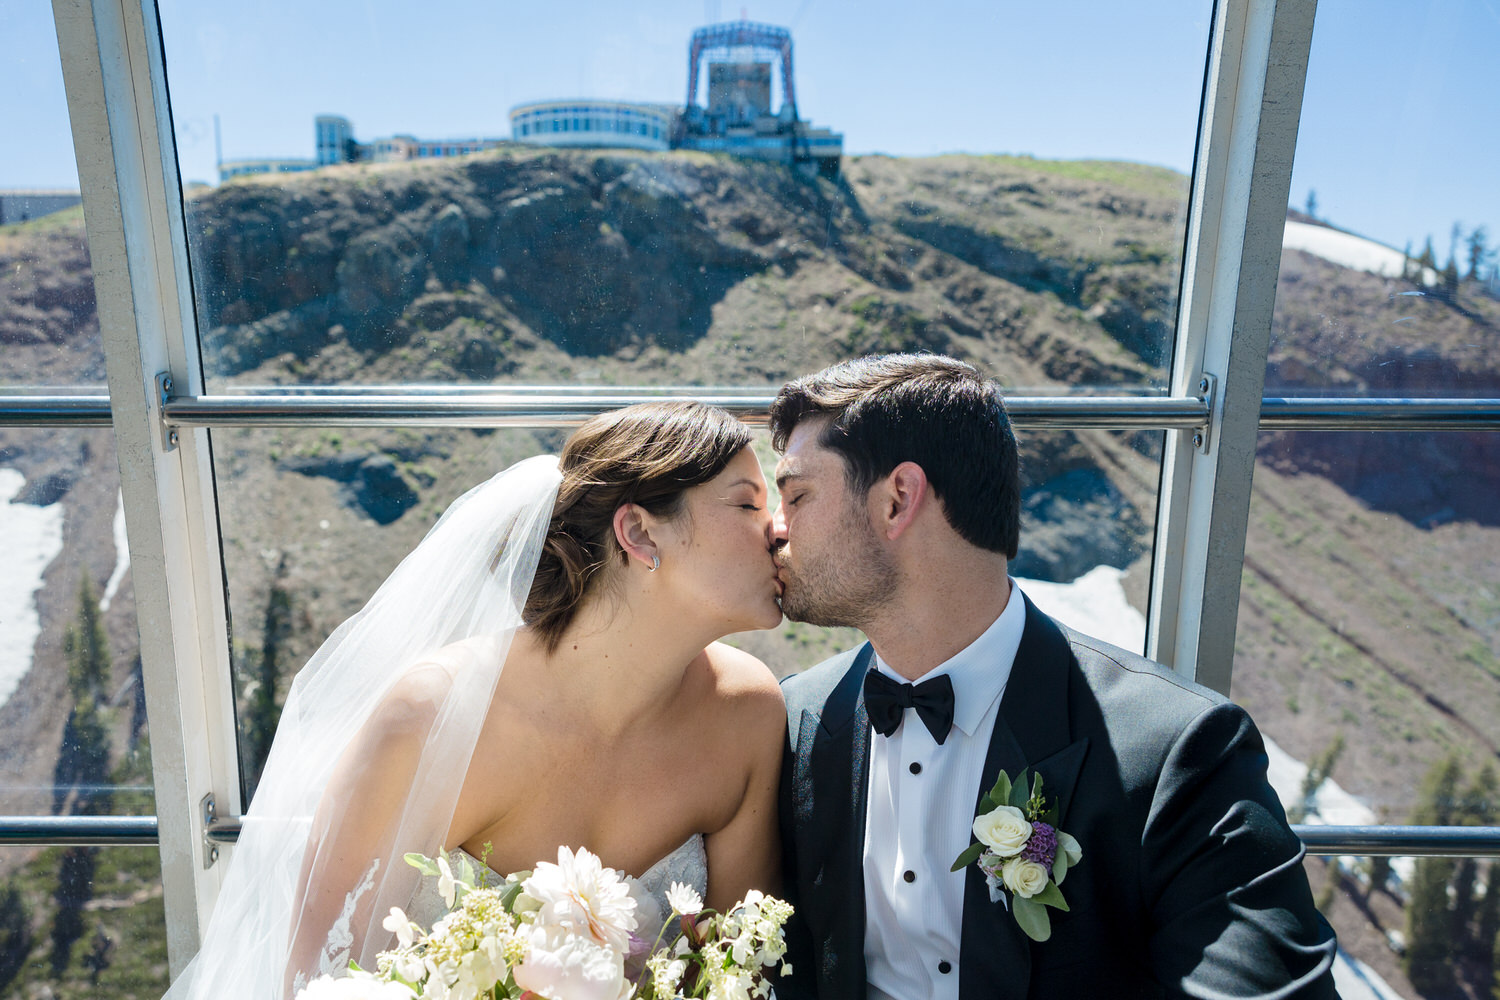 A magical kiss between the bride and groom aboard the aerial tram en route to their High Camp wedding.